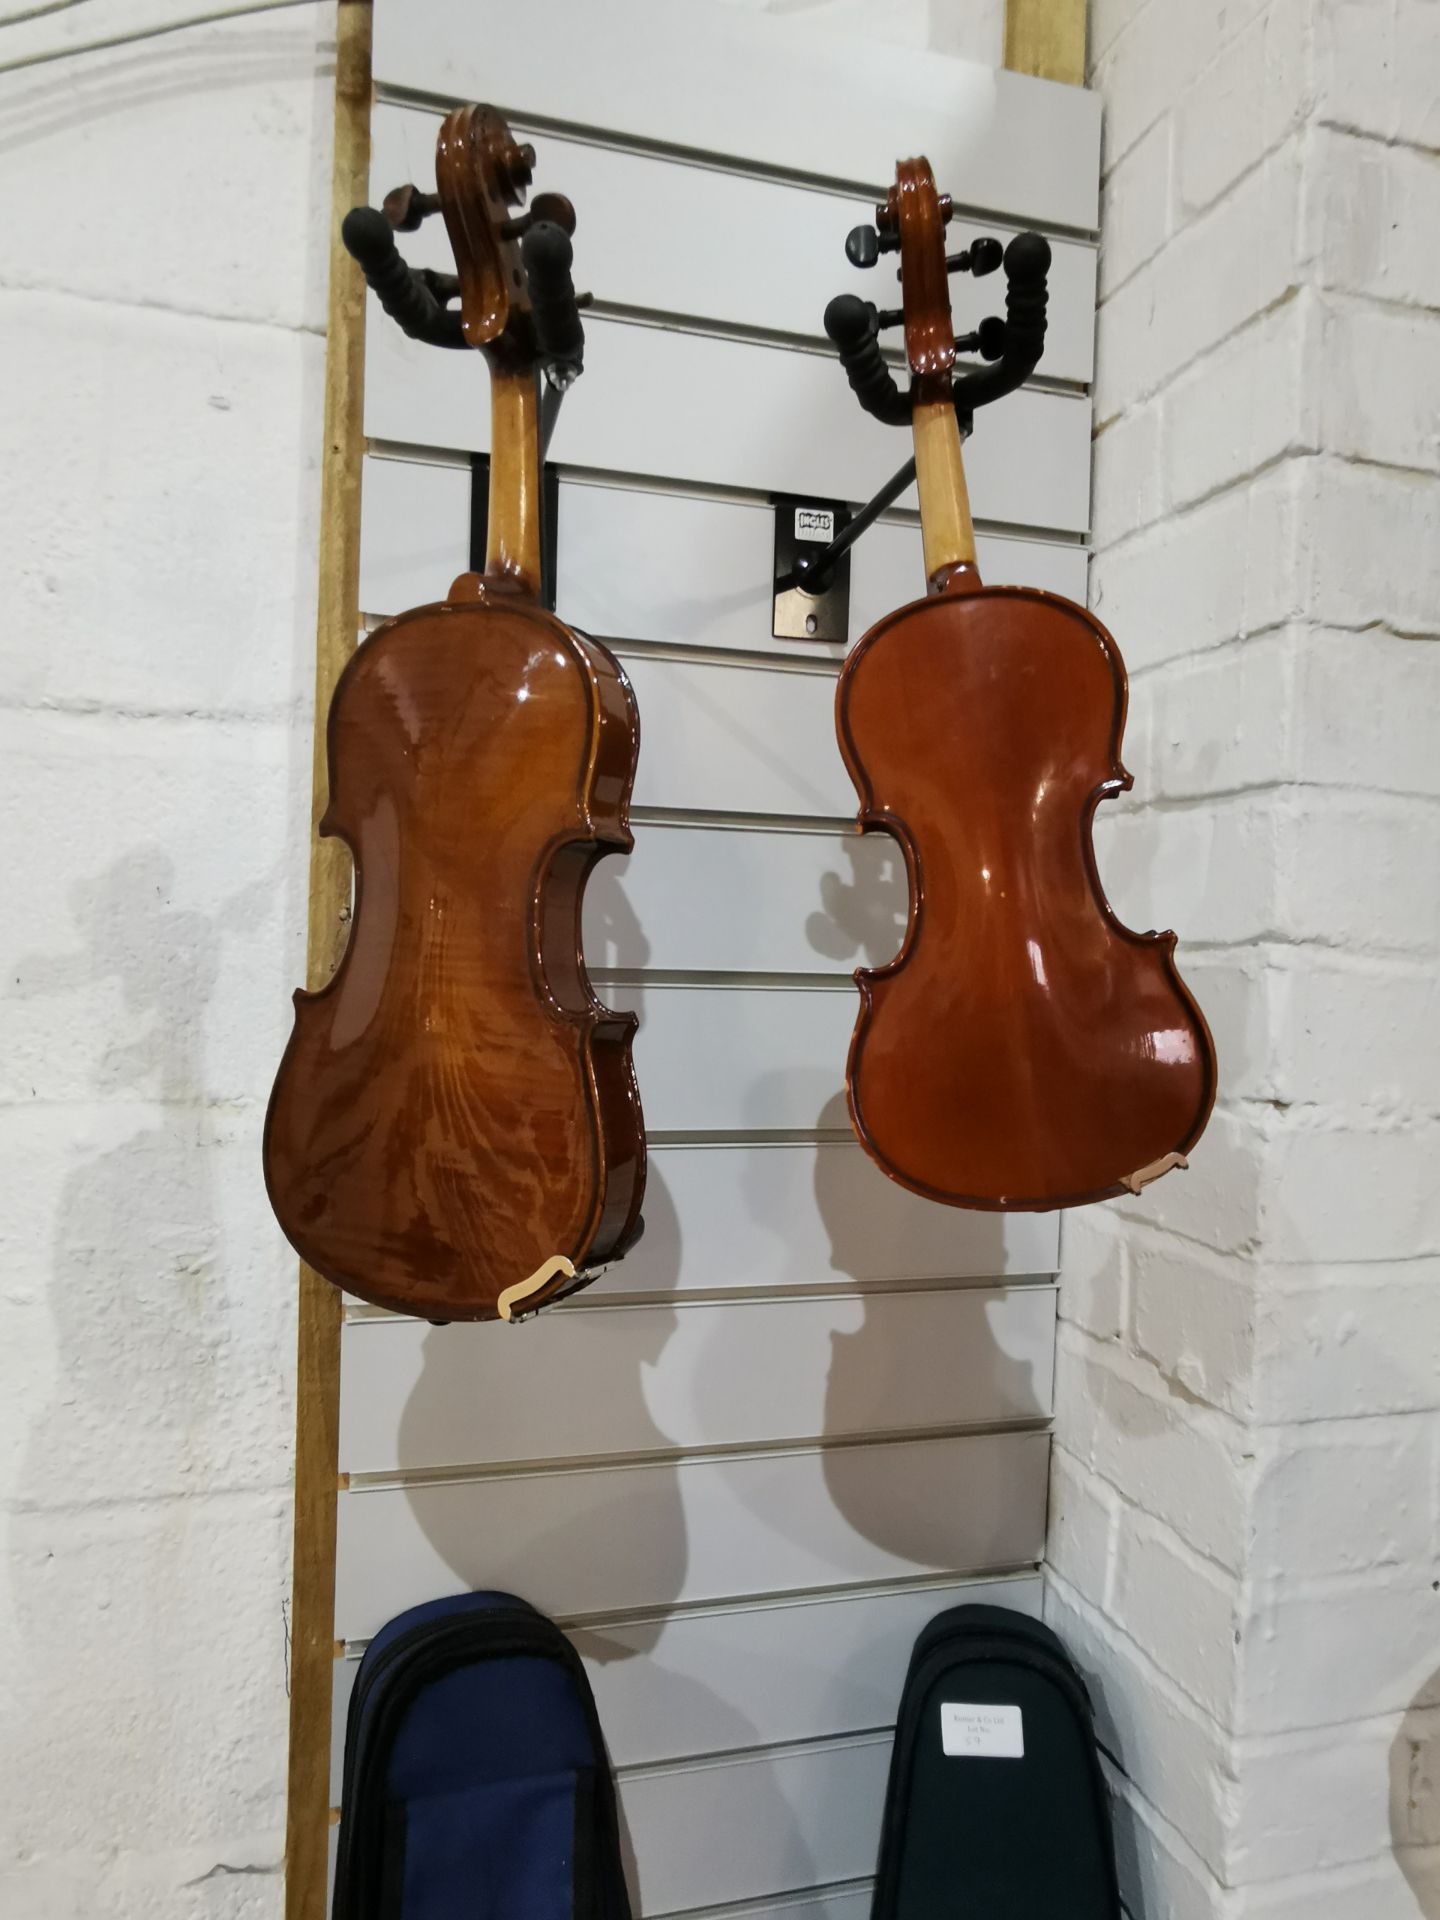 Violin with Case & Bow & Violin with Stentor Case & Bow (Used) - Image 6 of 6